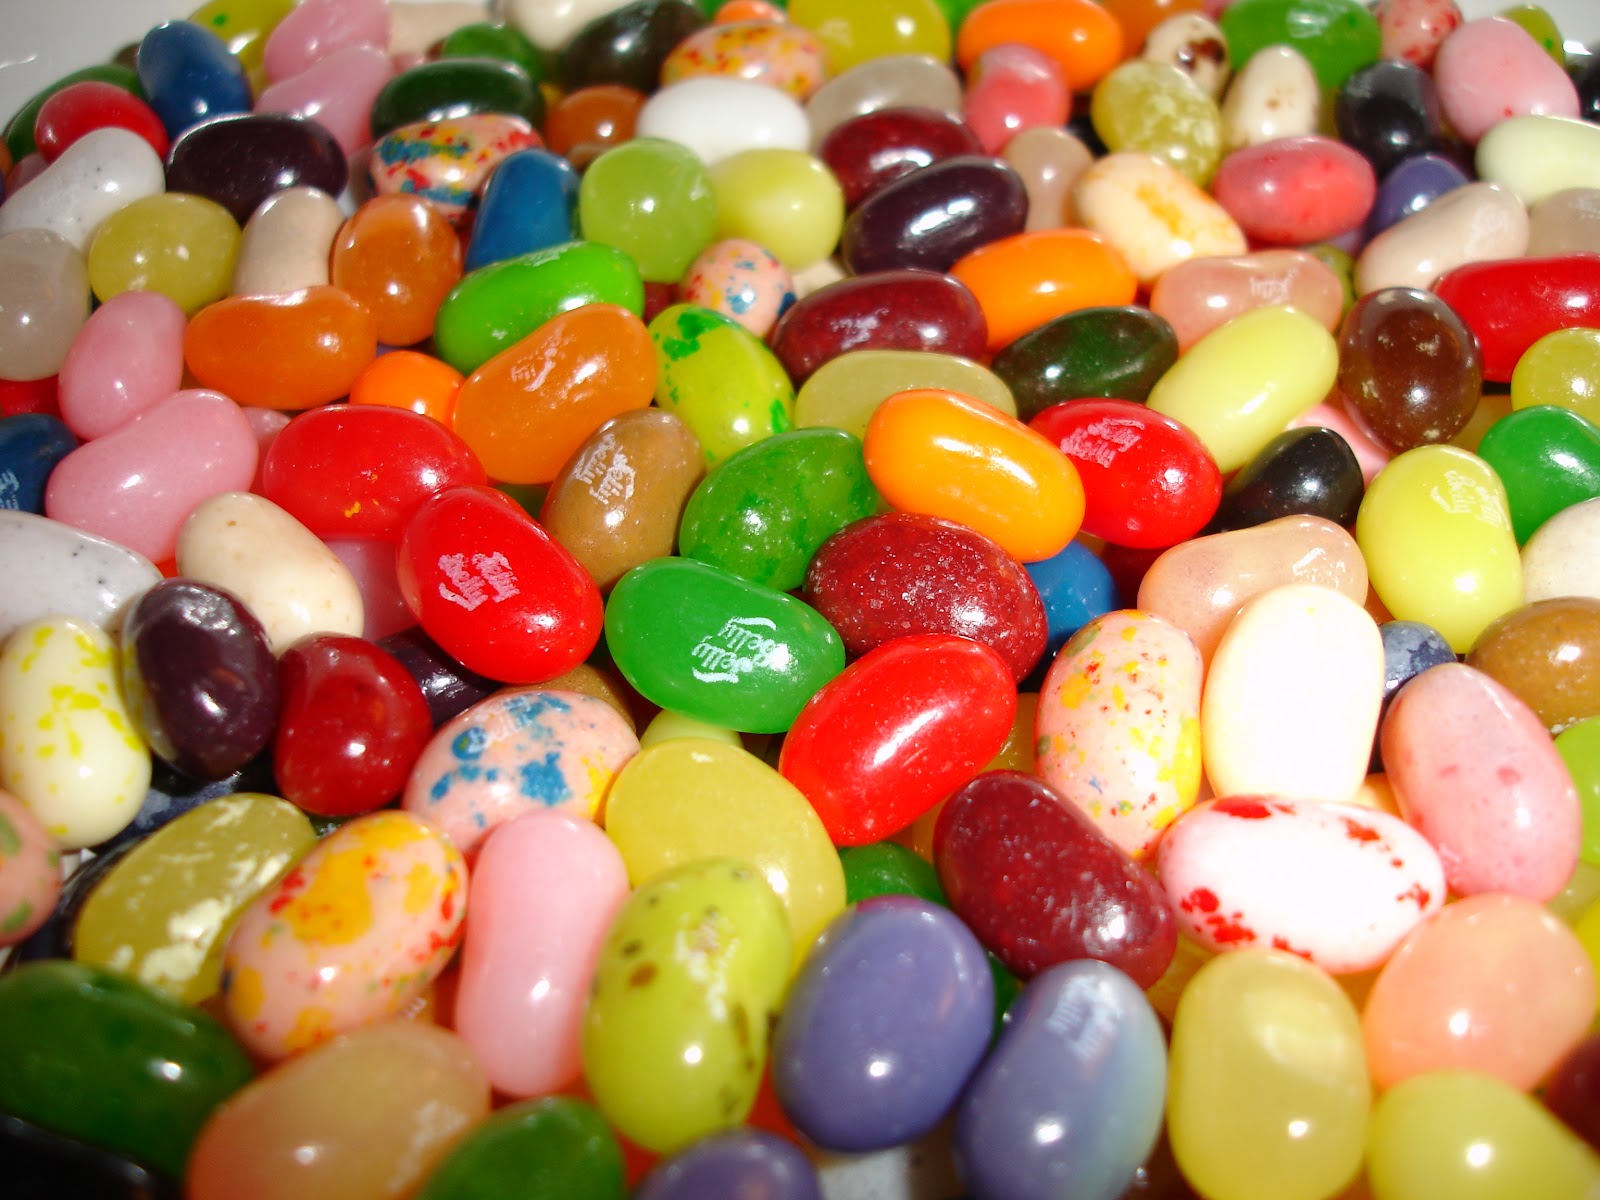 Jelly Belly jelly beans[edit]